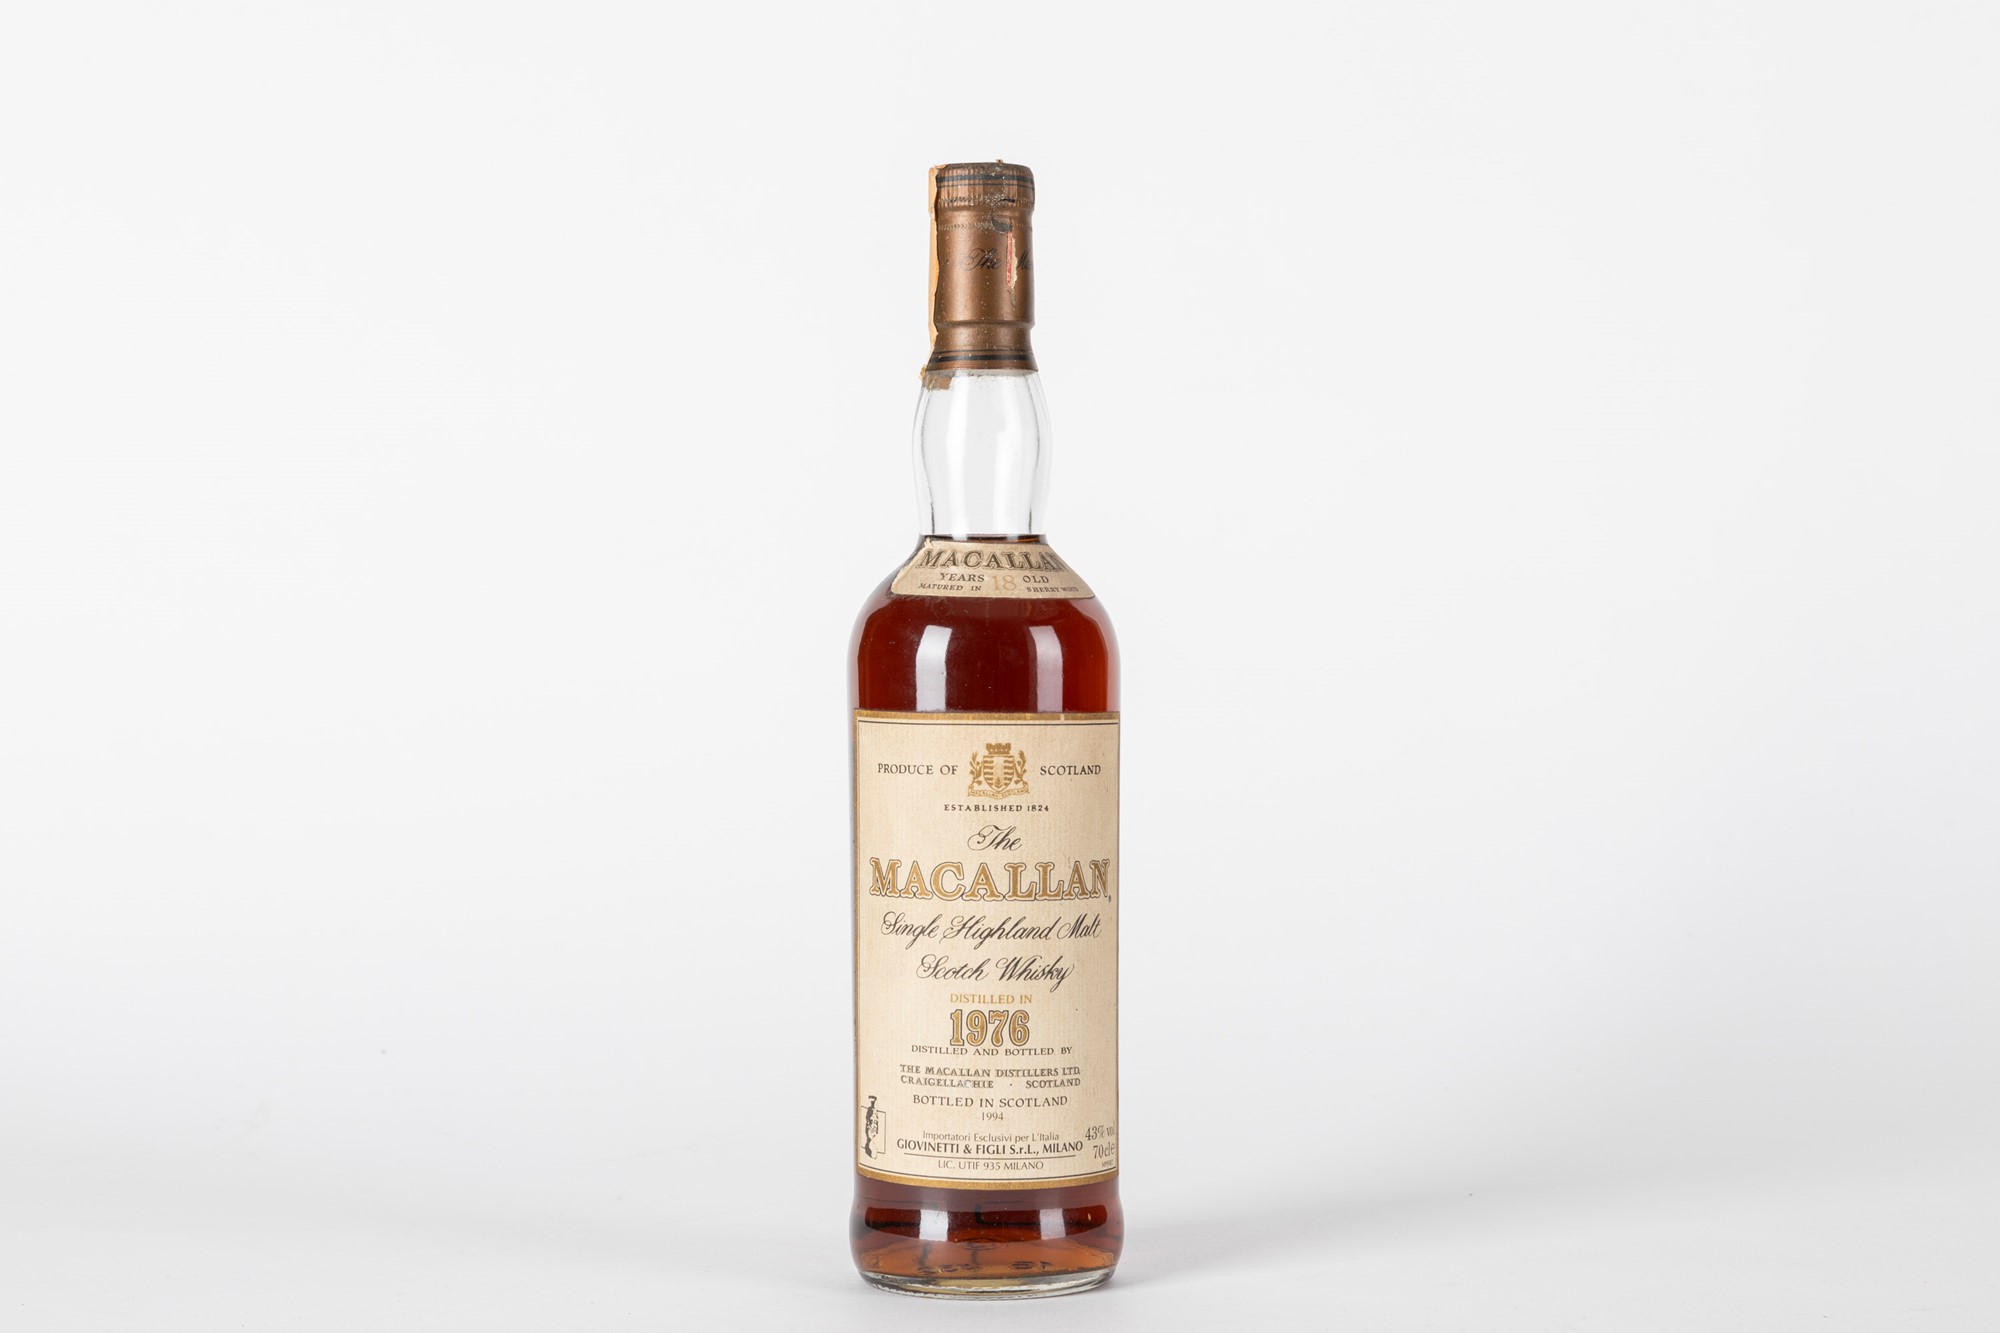 MACALLAN SCOTCH WHISKY 18 YEARS OLD 1976